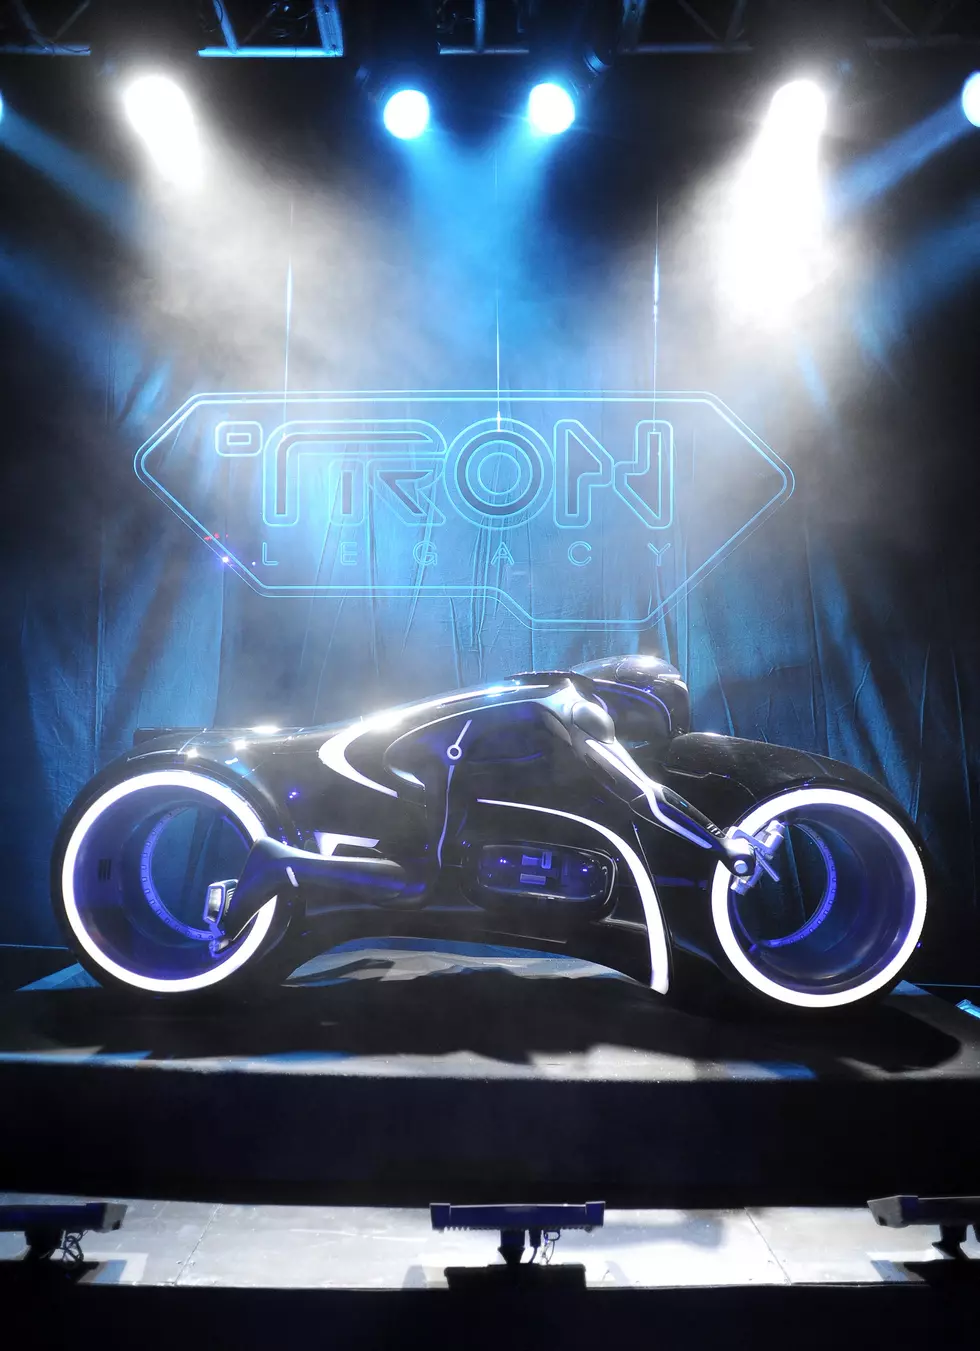 Tron Light Cycle Could Be Yours For The Right Price